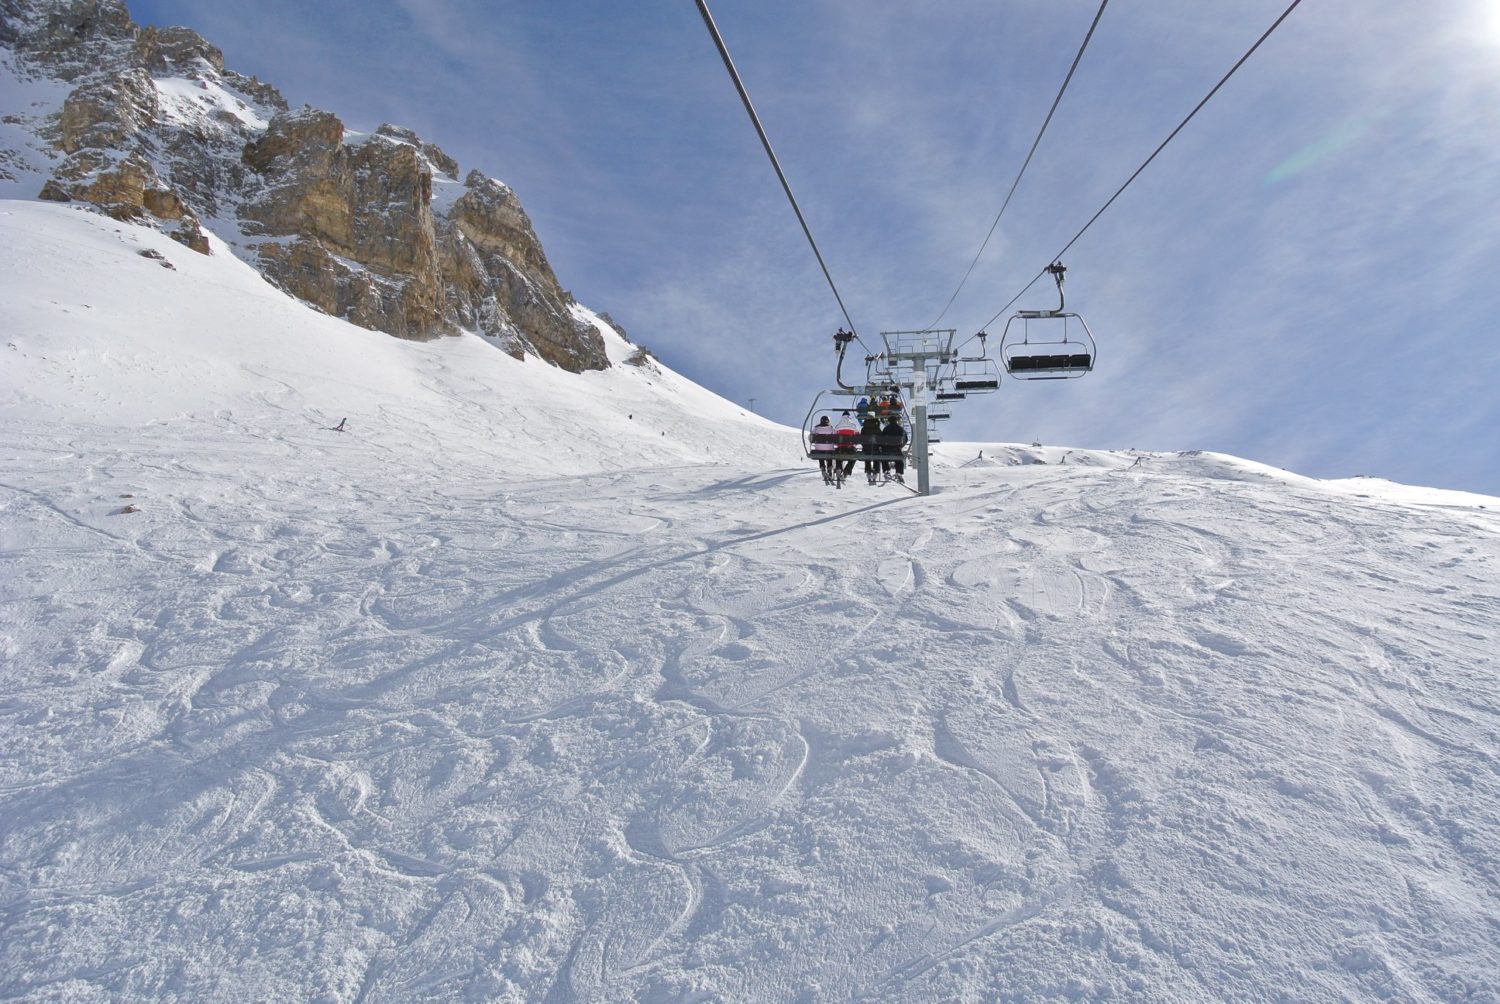 Ski holidays already cost a lot of money, hopefully the cost doesn't increase too much more